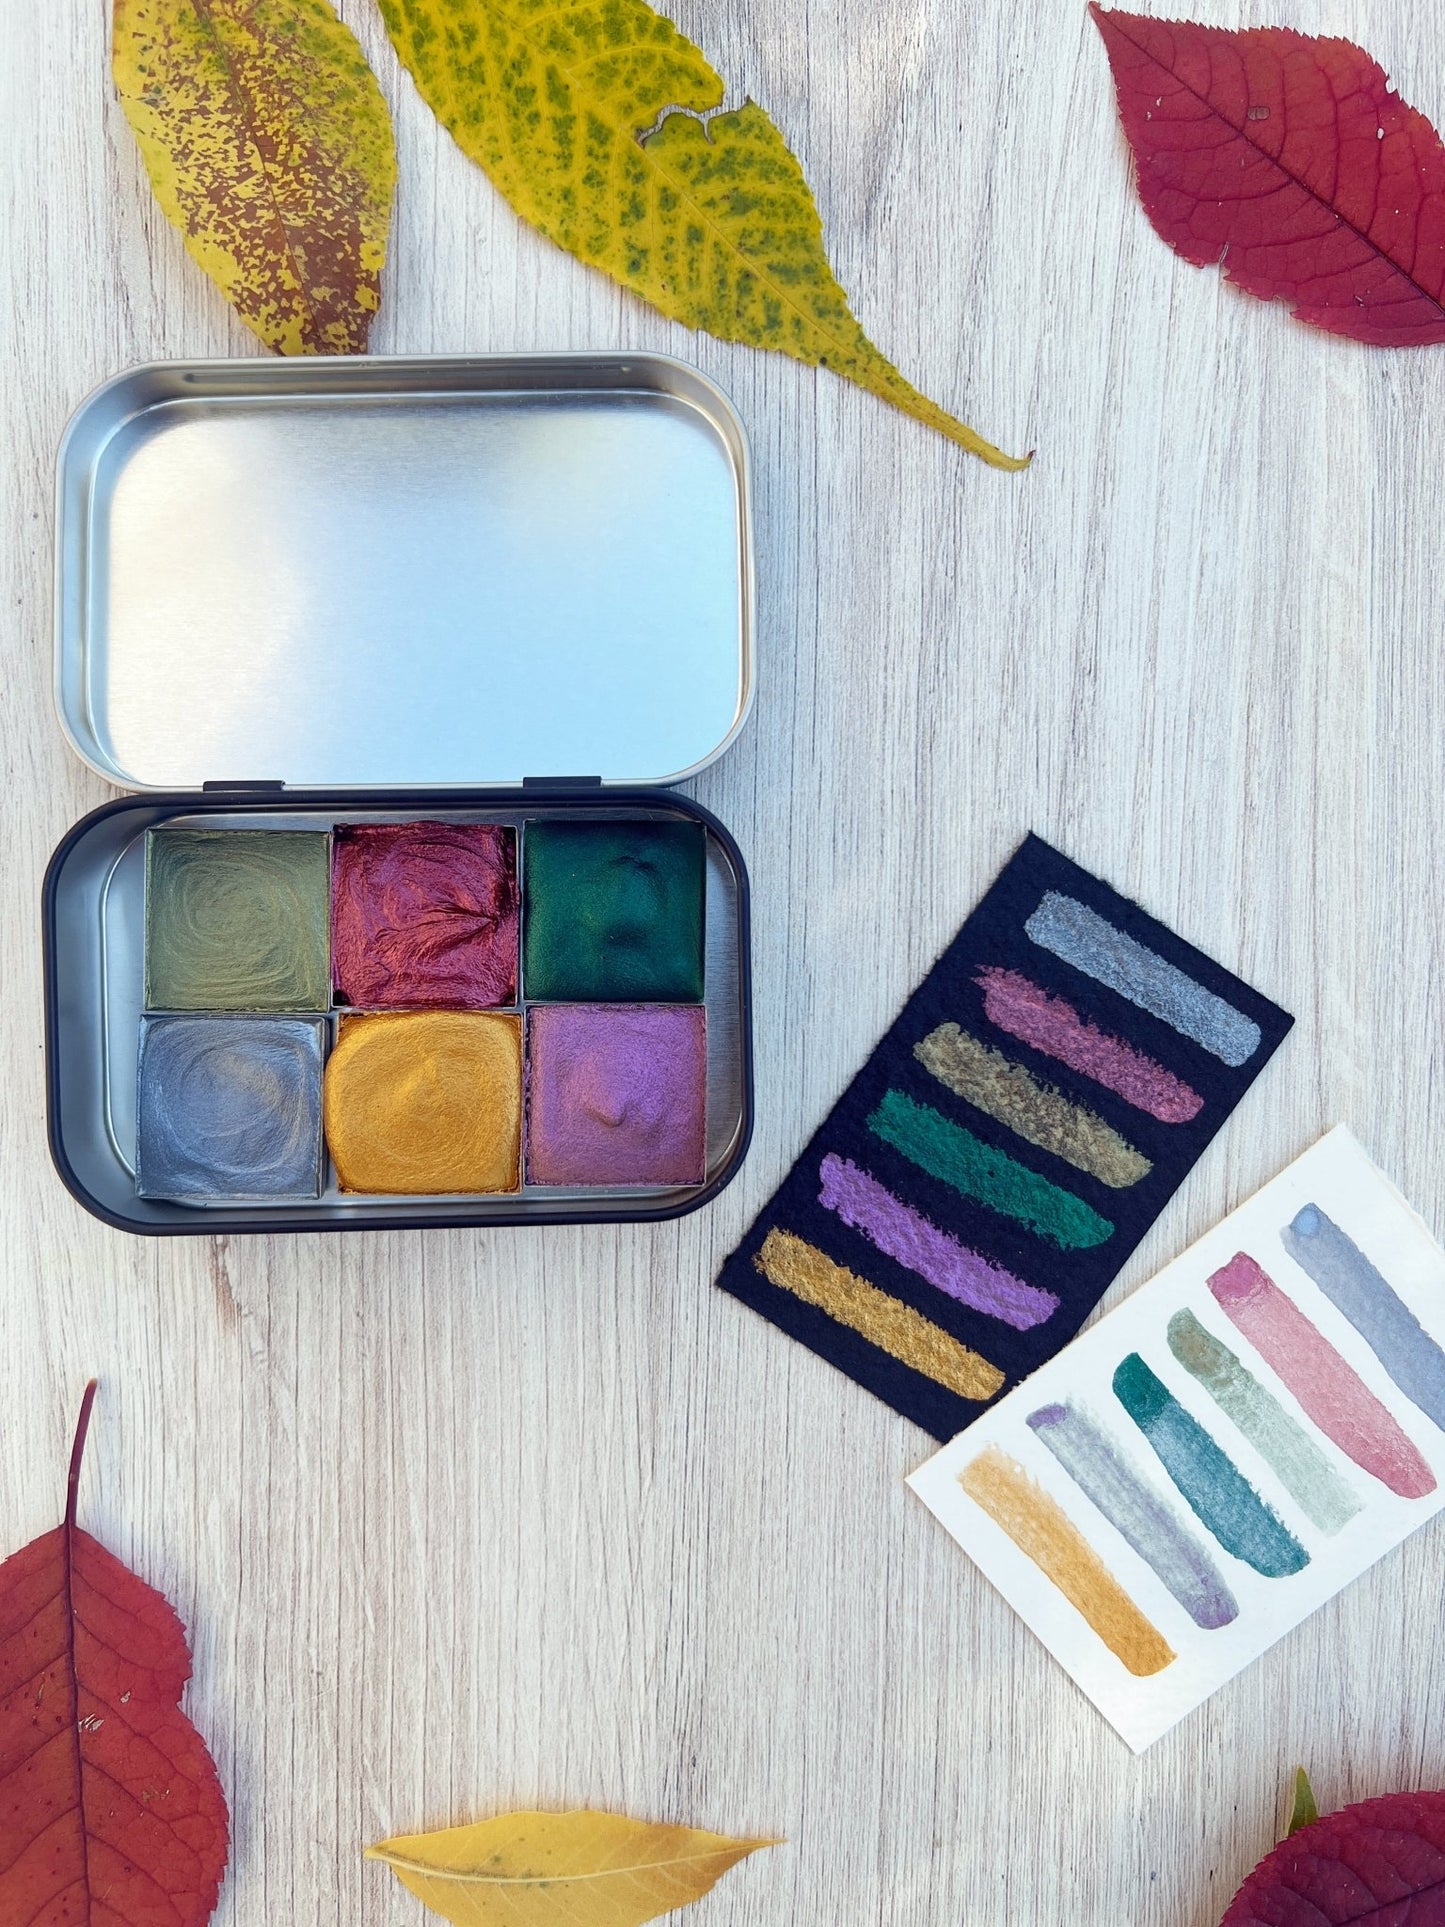 Harvest Shimmers, a palette of six shimmery watercolors